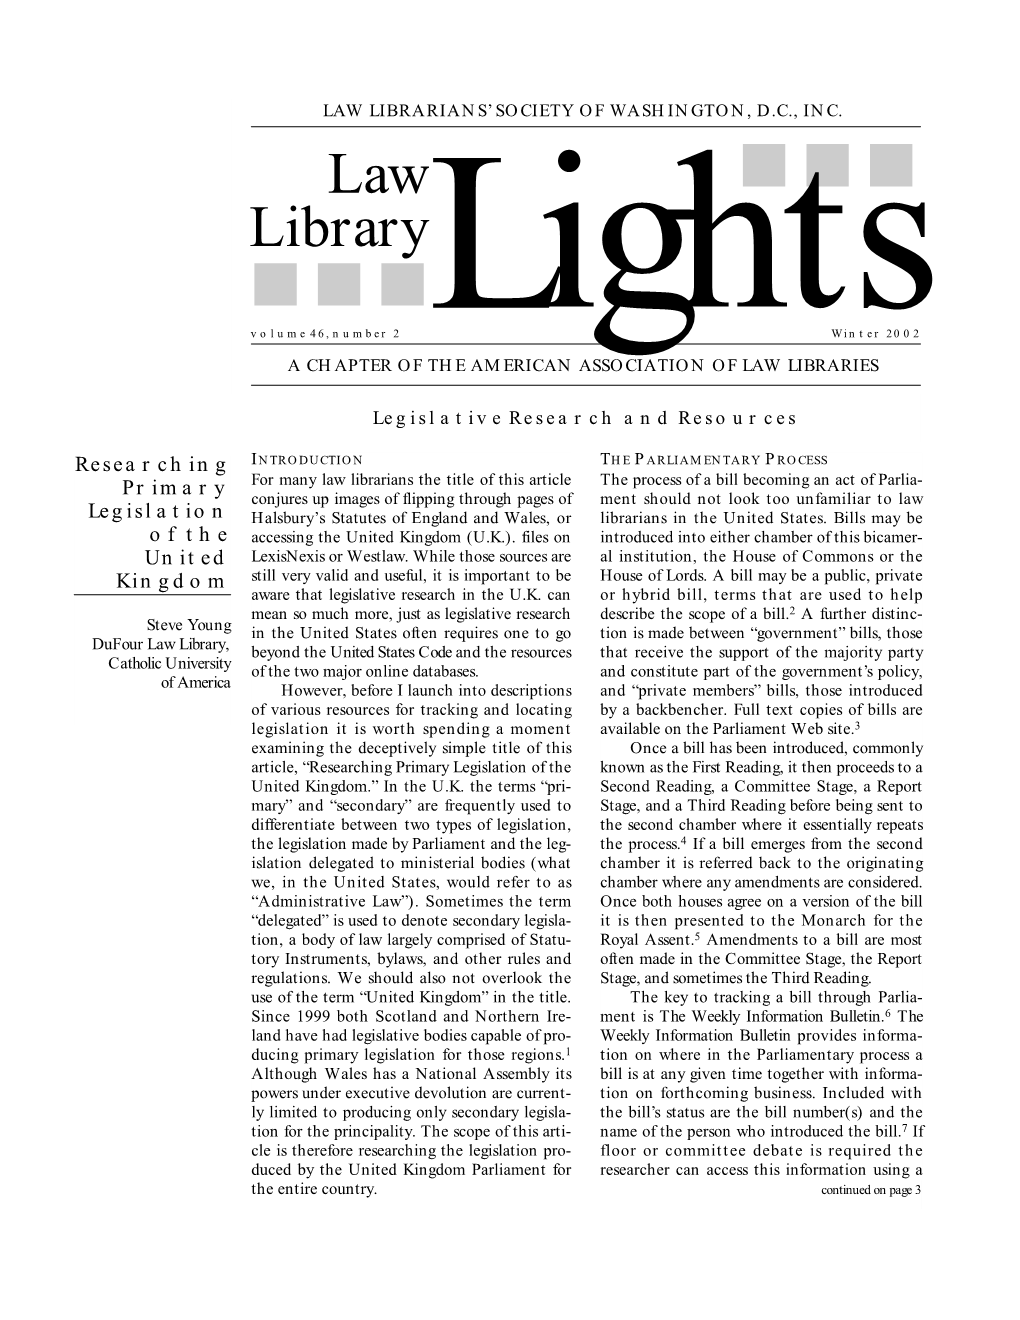 Winter 2002 a CHAPTER of the AMERICAN ASSOCIATION of LAW LIBRARIES